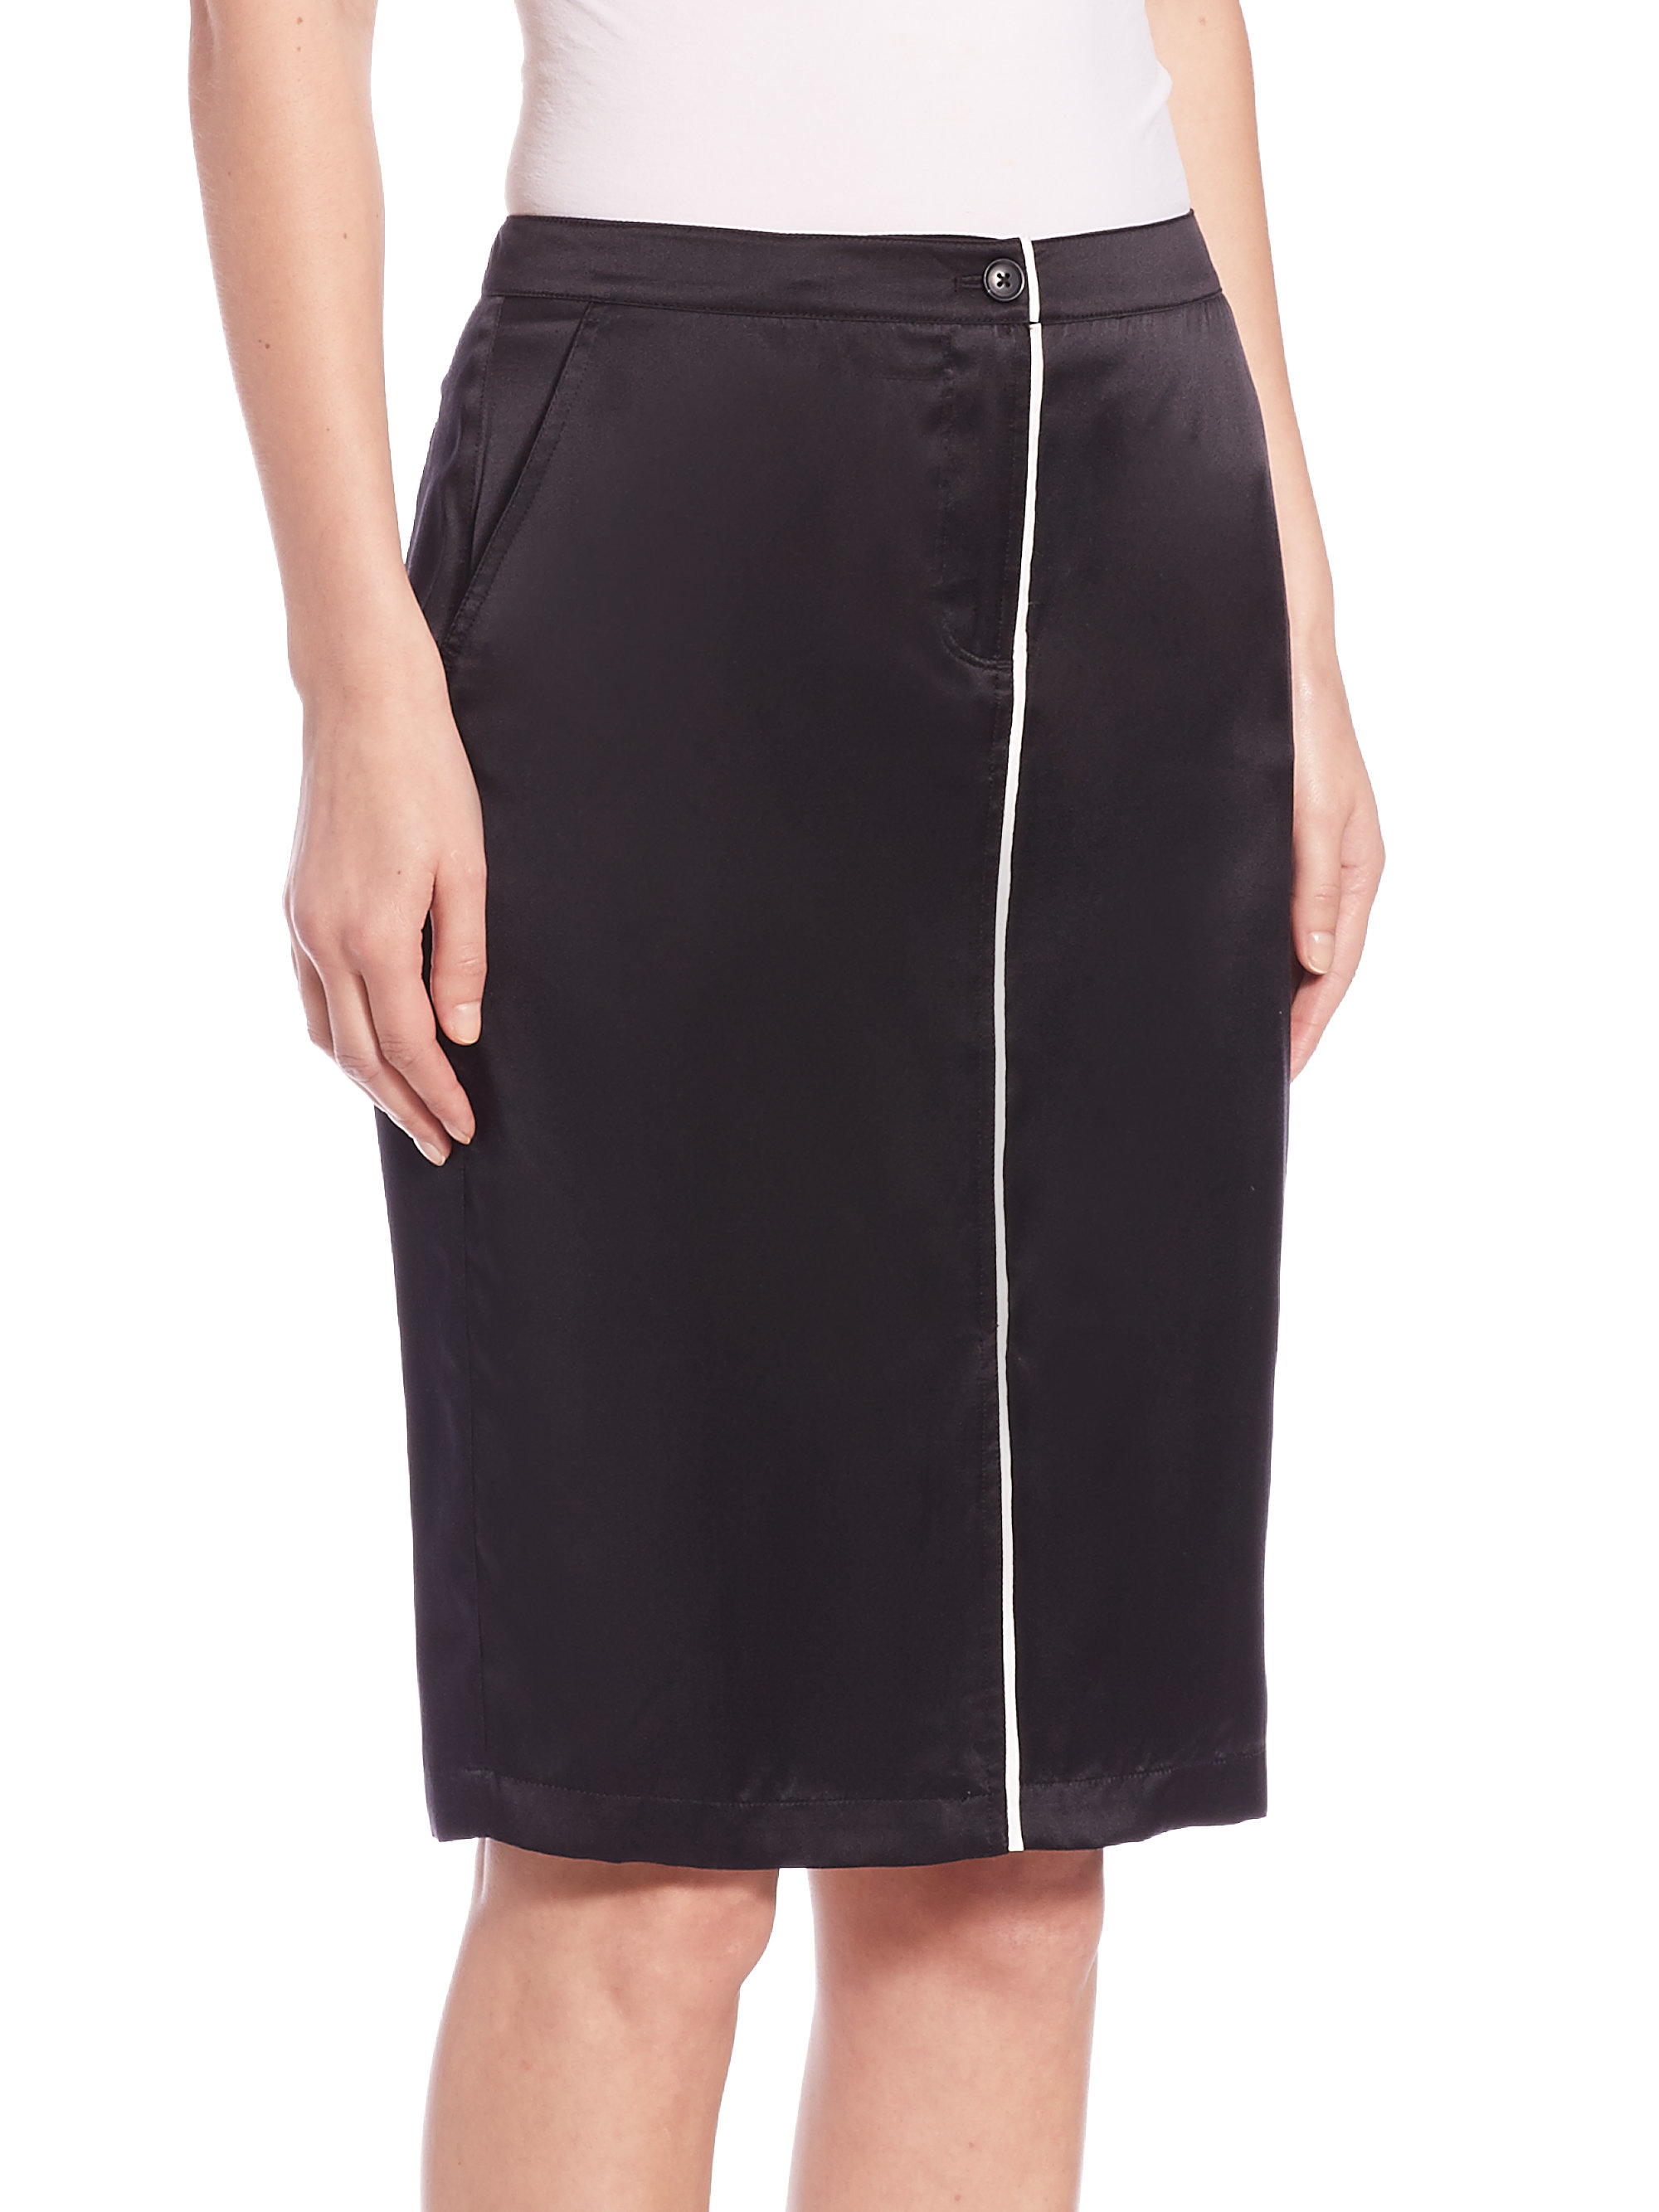 Lyst - Atm Piped Silk Satin Pencil Skirt in Black